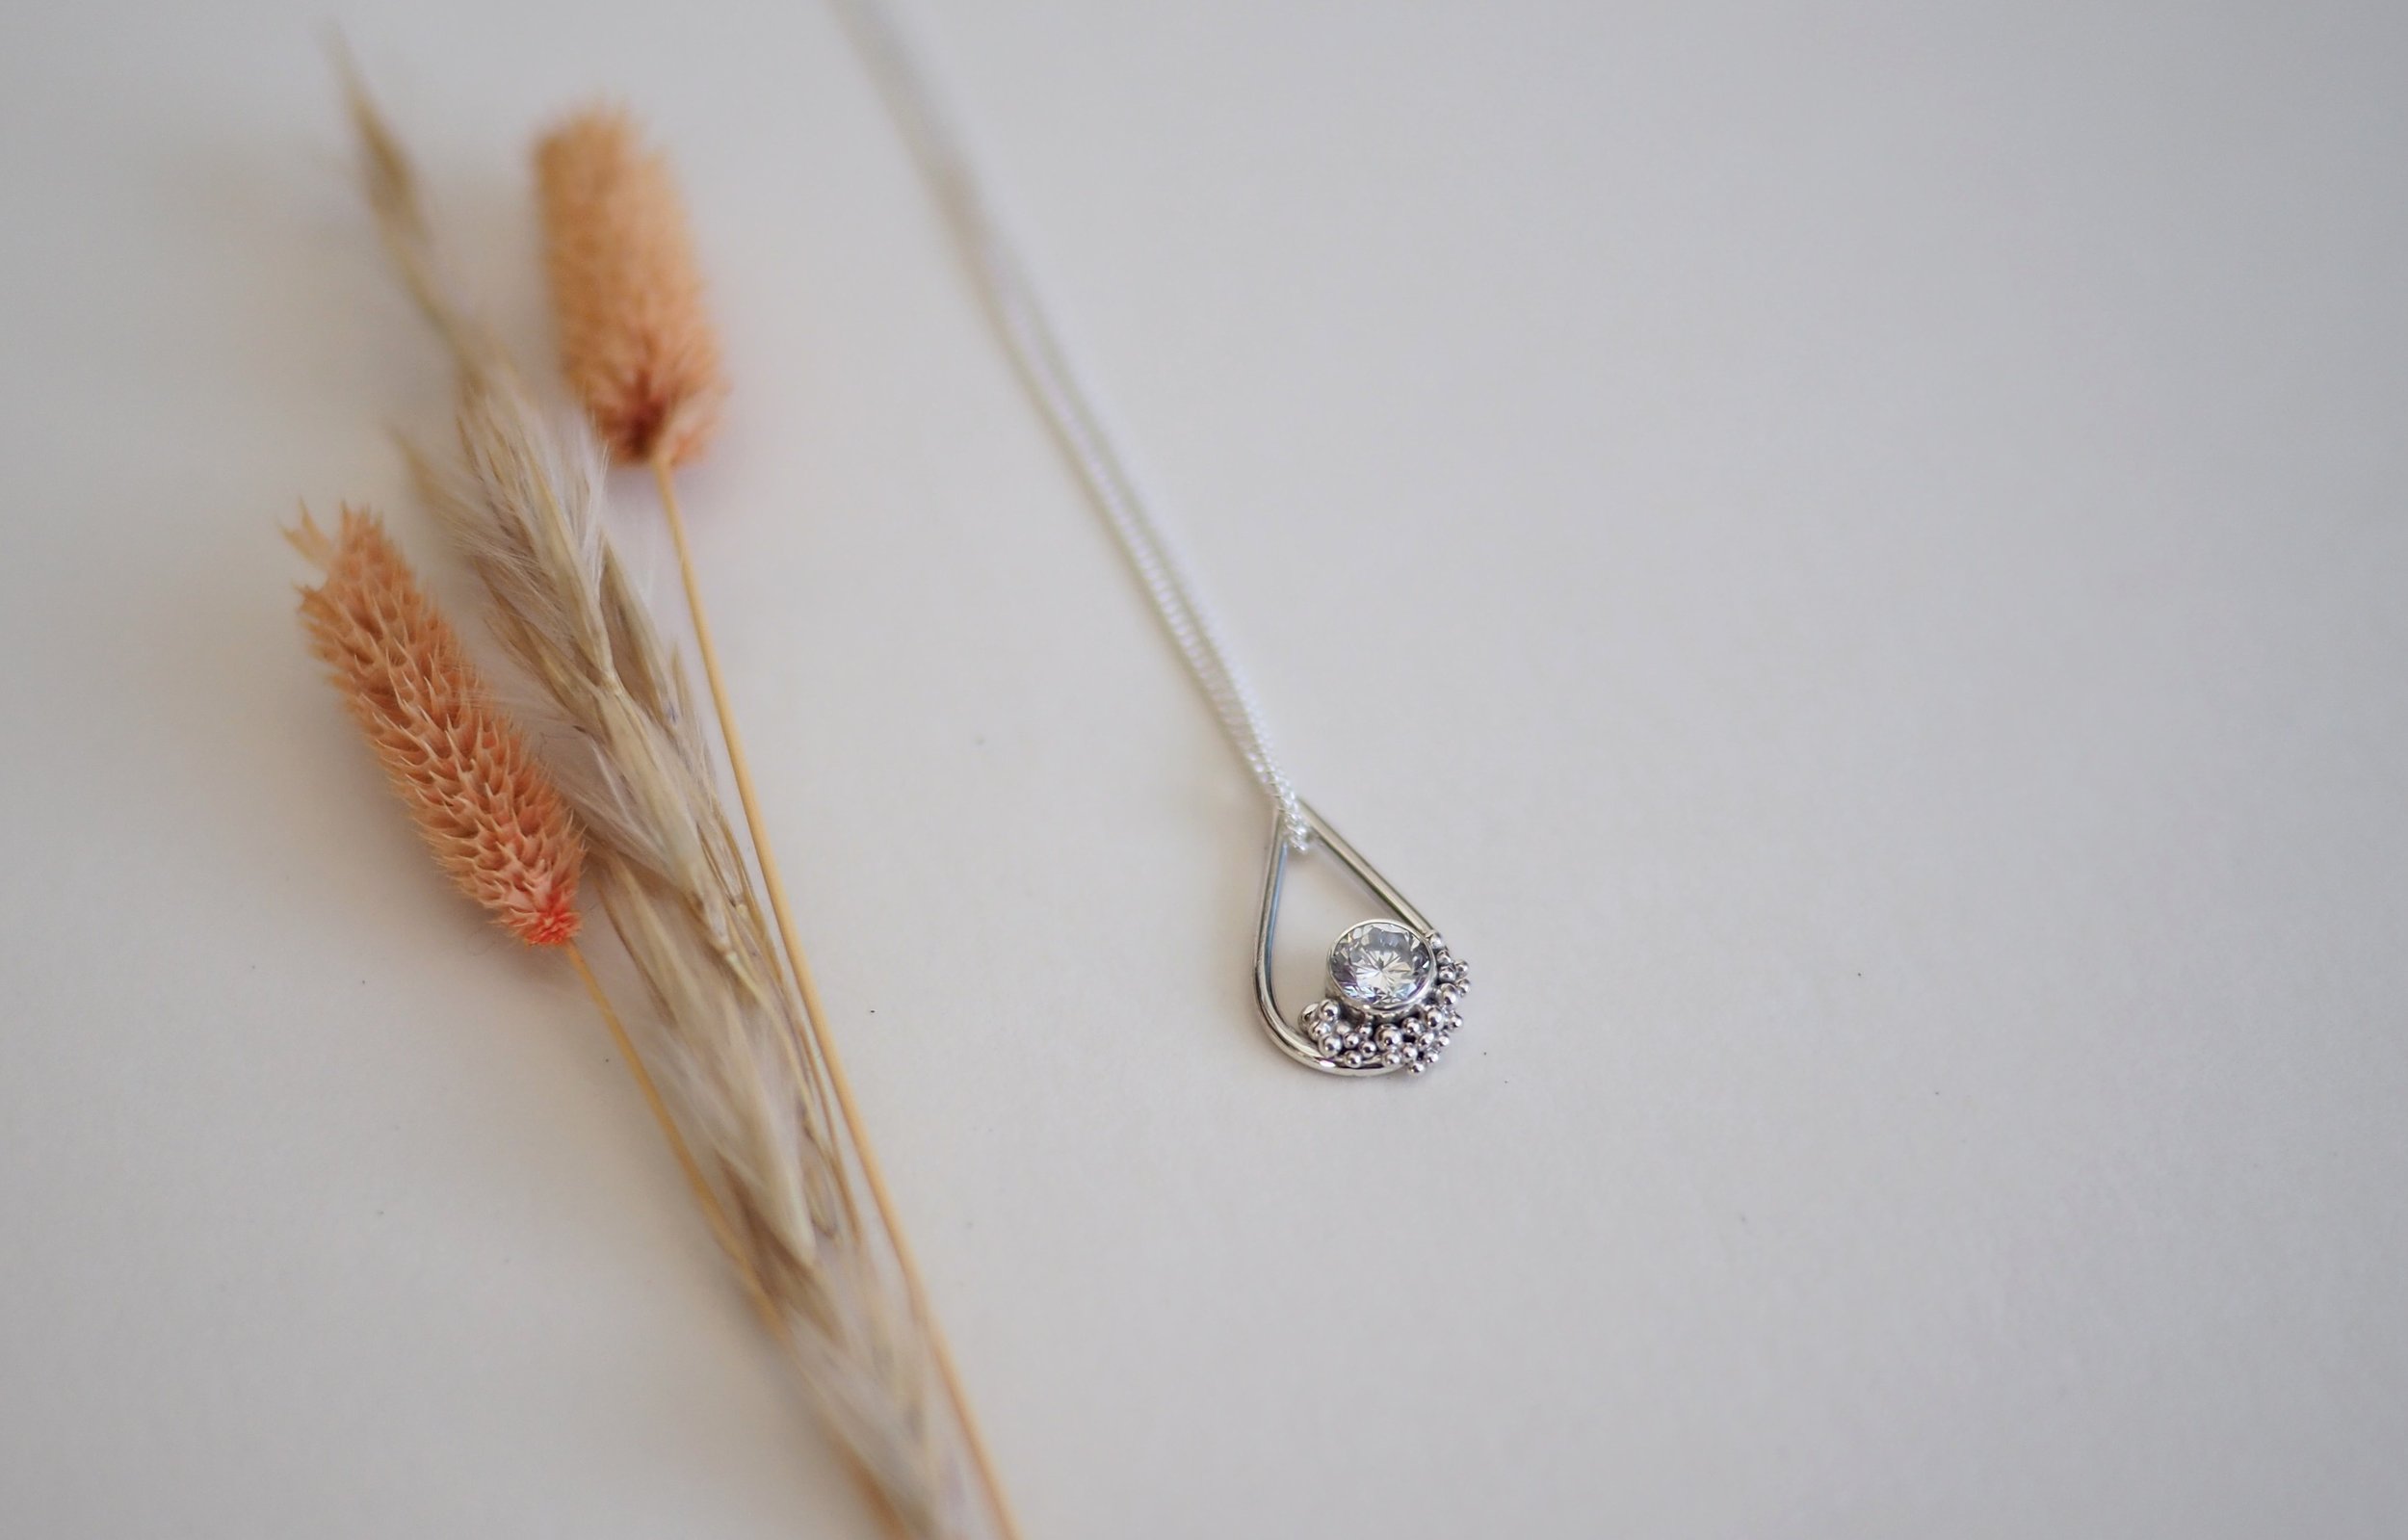  DewDrop, One Of A Kind Granulated Recycled Silver Pendant.